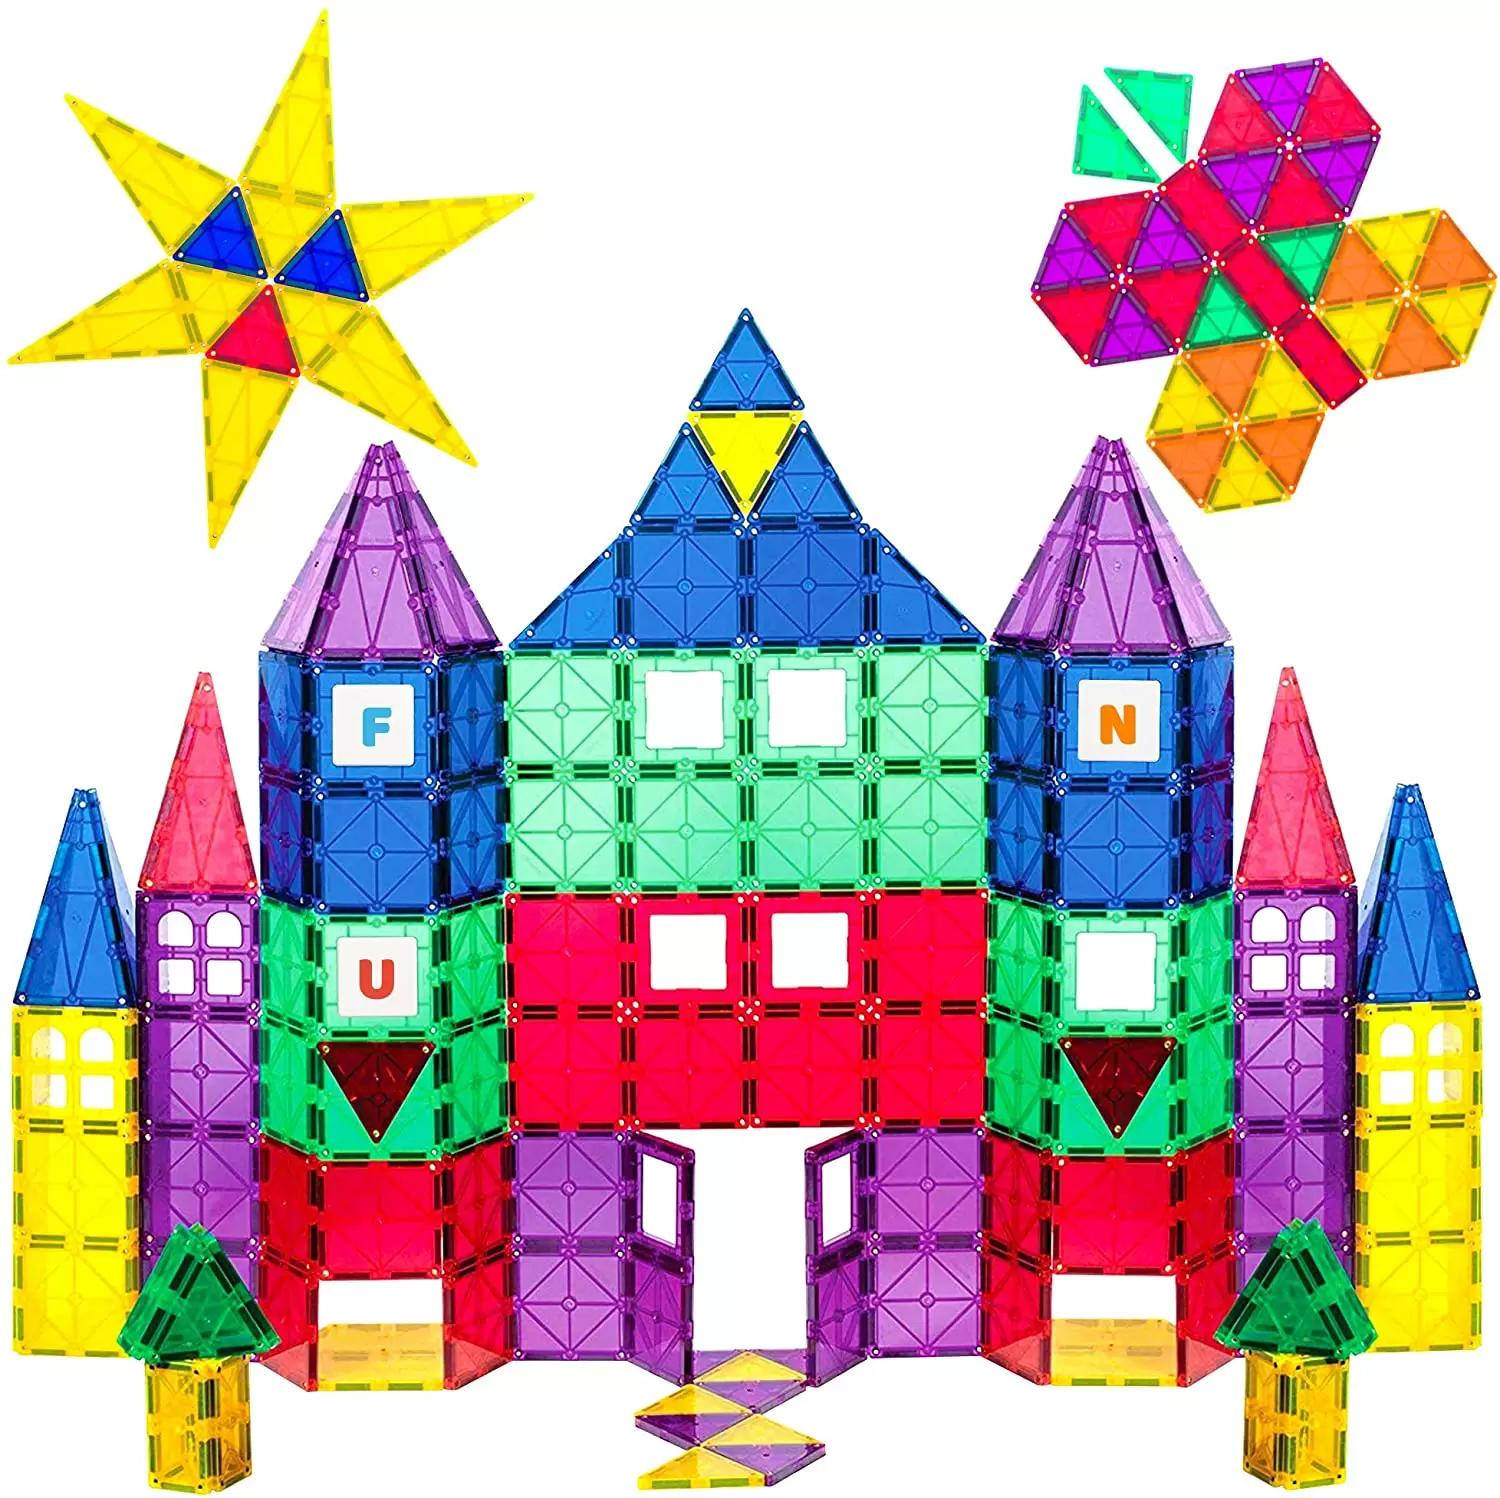 100-Piece Playmags 3D Magnetic Toy Blocks for $37.49 Shipped